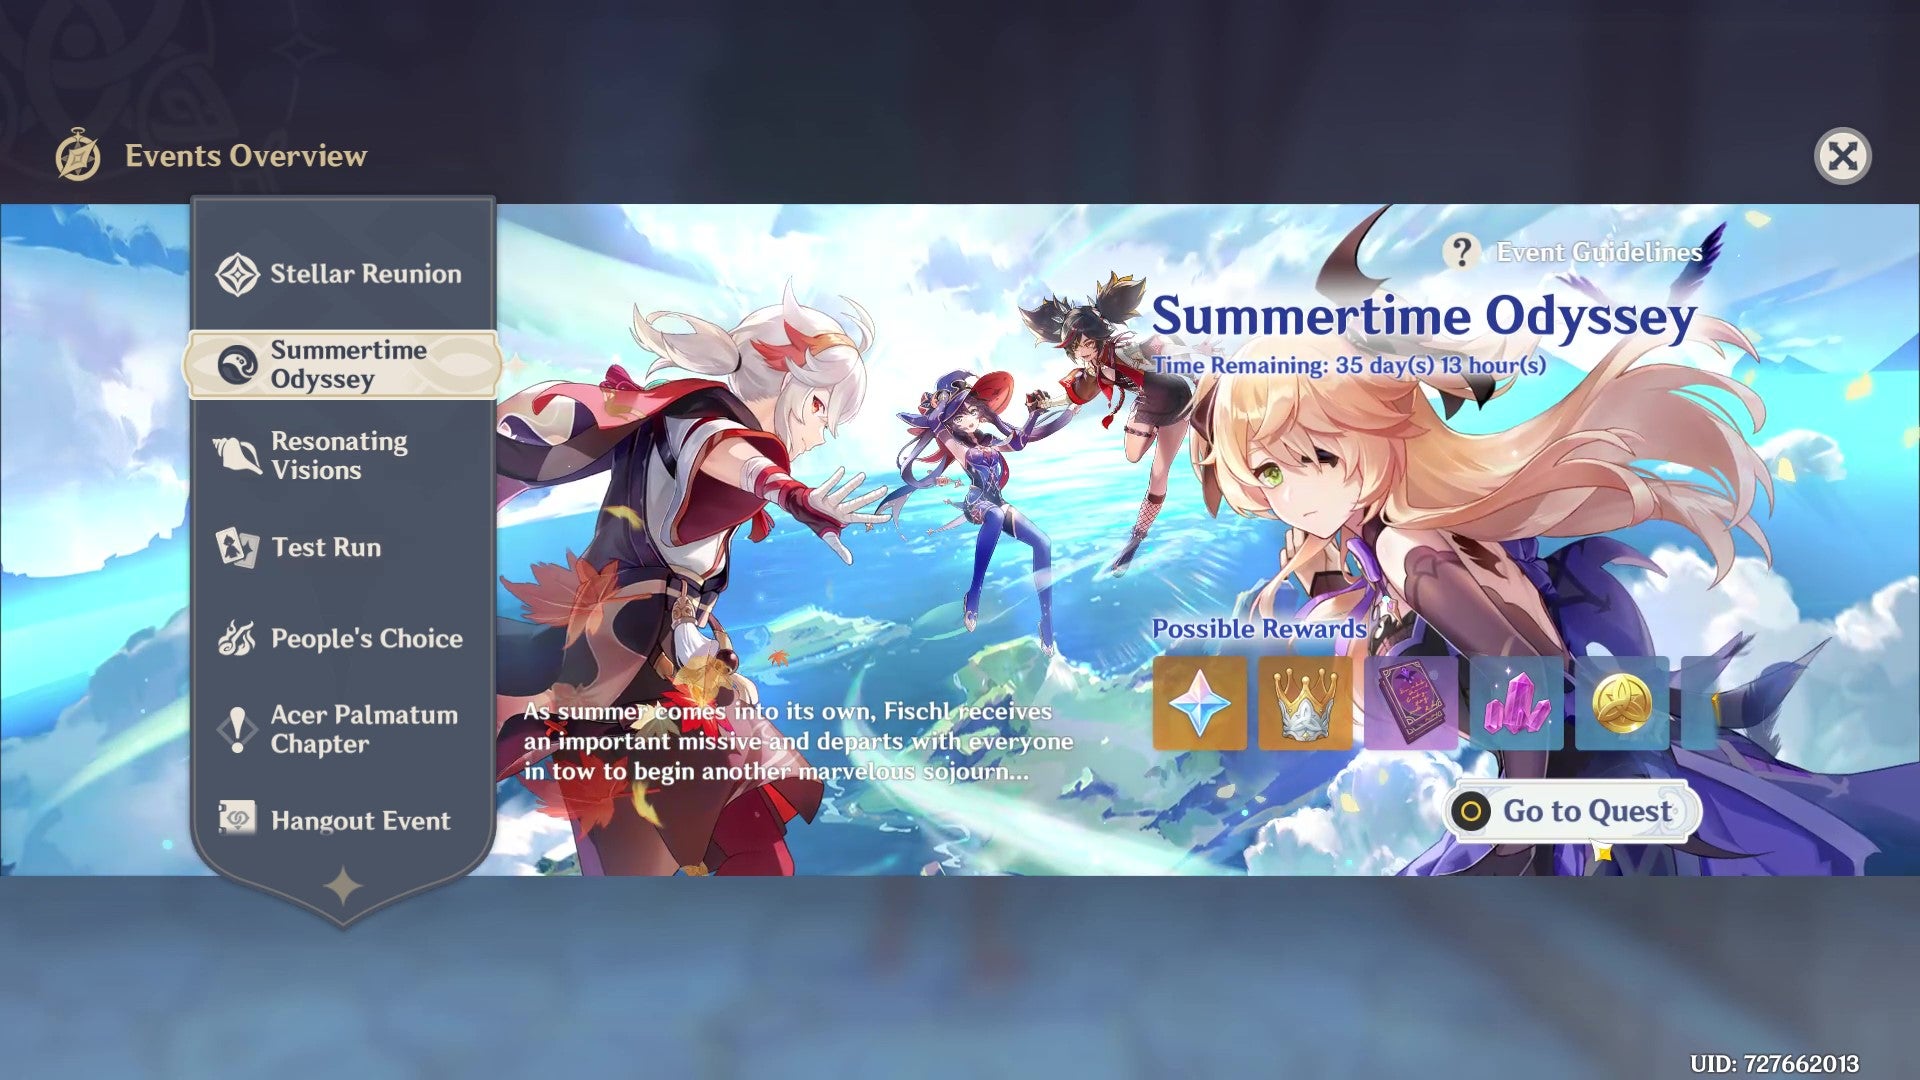 The Events Overview tab in Genshin Impact, showing timed details for the Summertime Odyssey event.